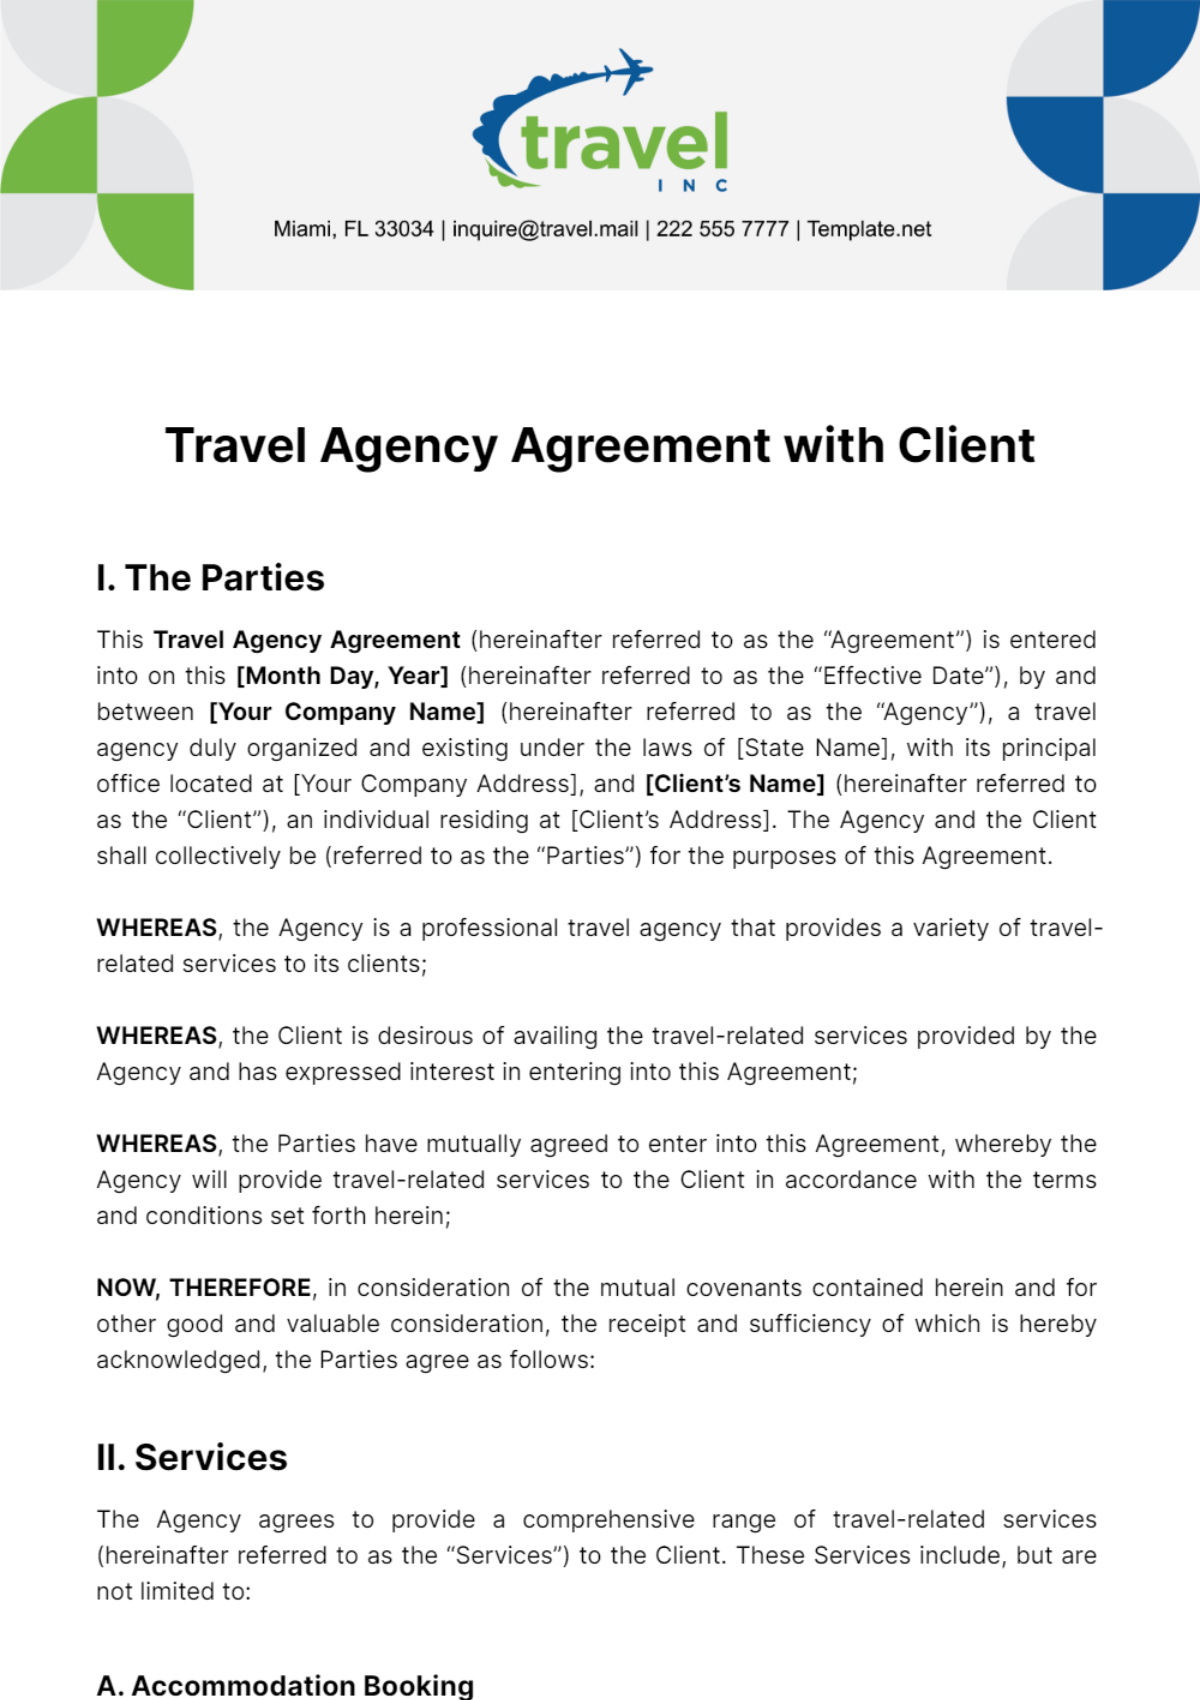 Travel Agency Agreement with Client Template